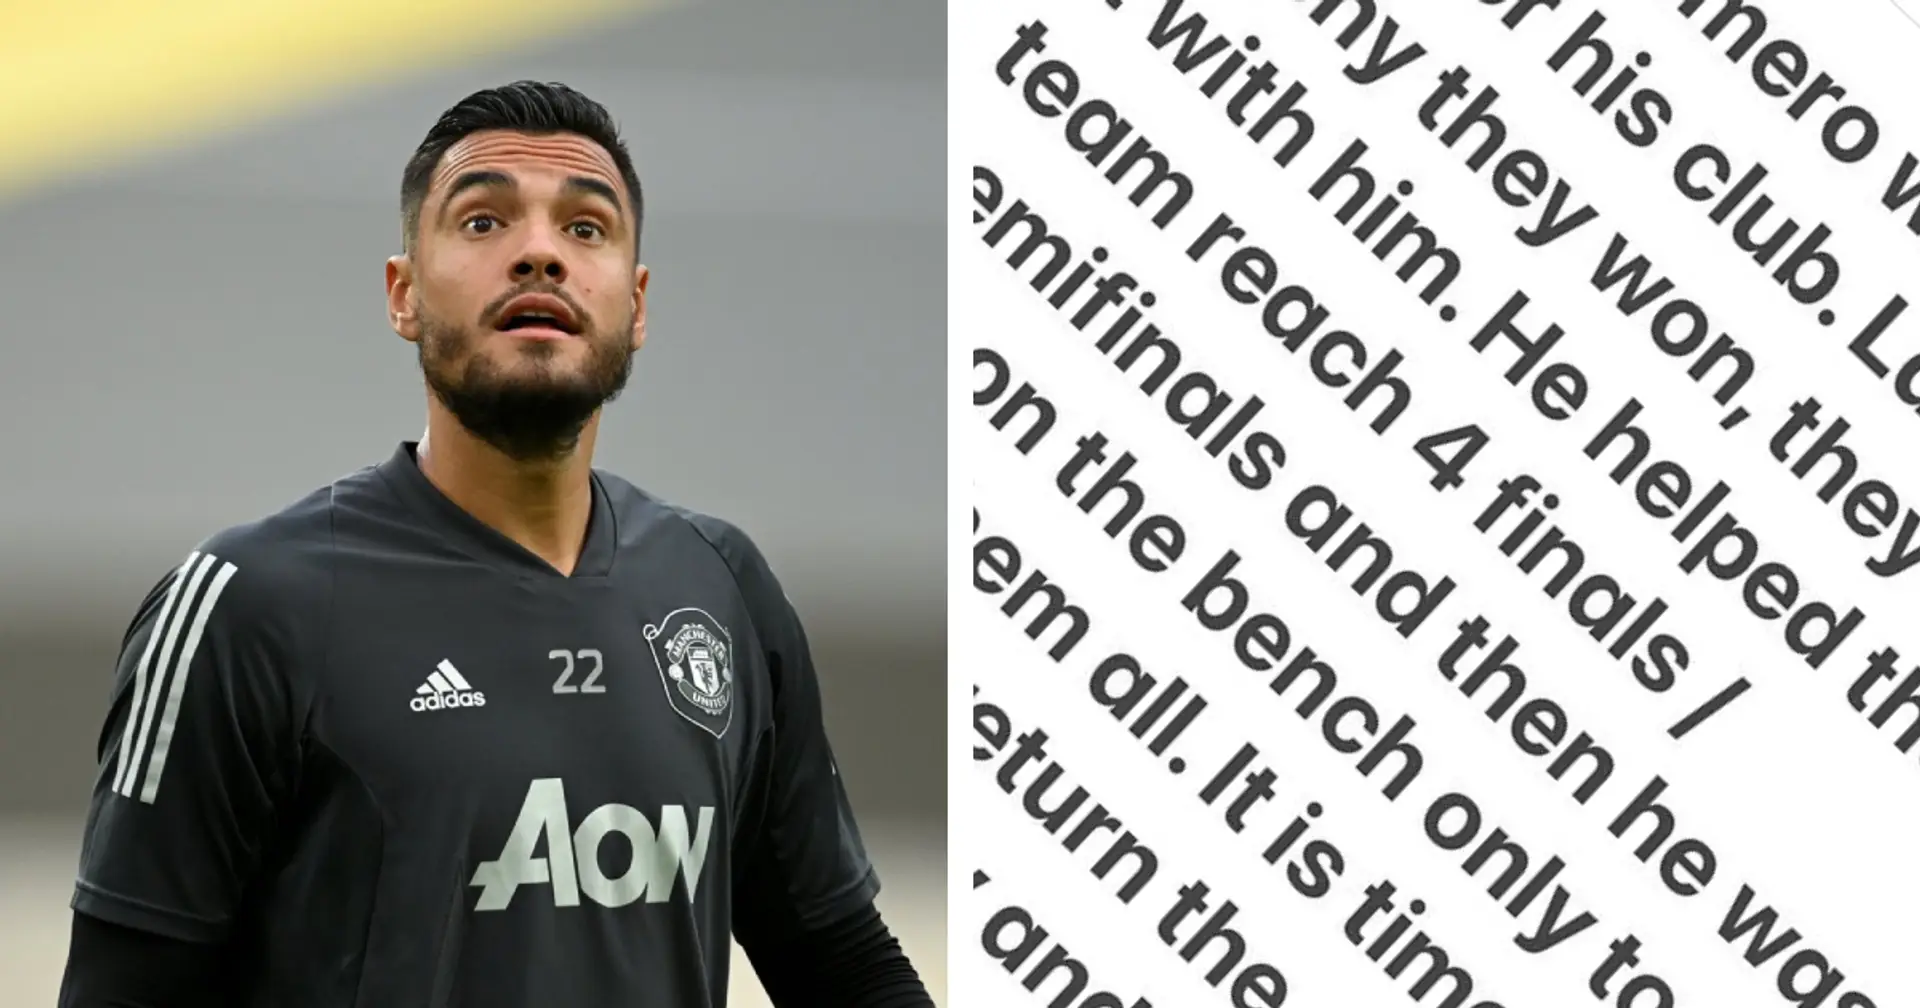 'It is time to let him go. Respect for once!': Sergio Romero's wife slams Man United